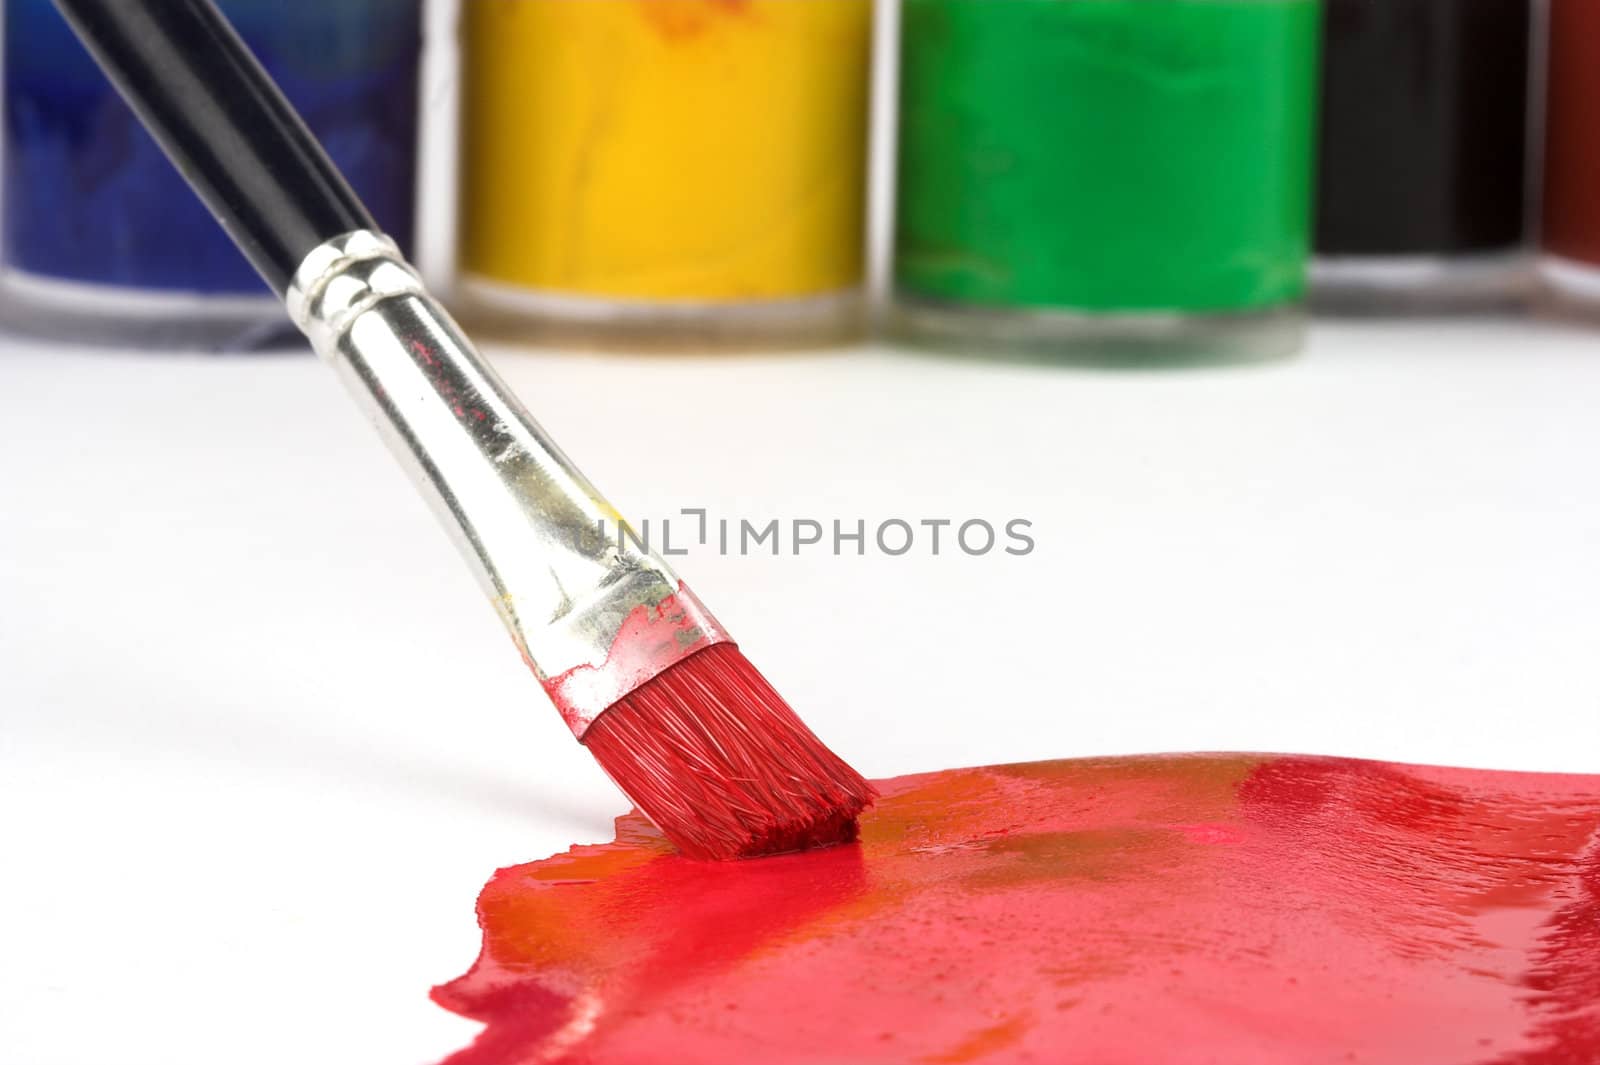 A brush paint in red